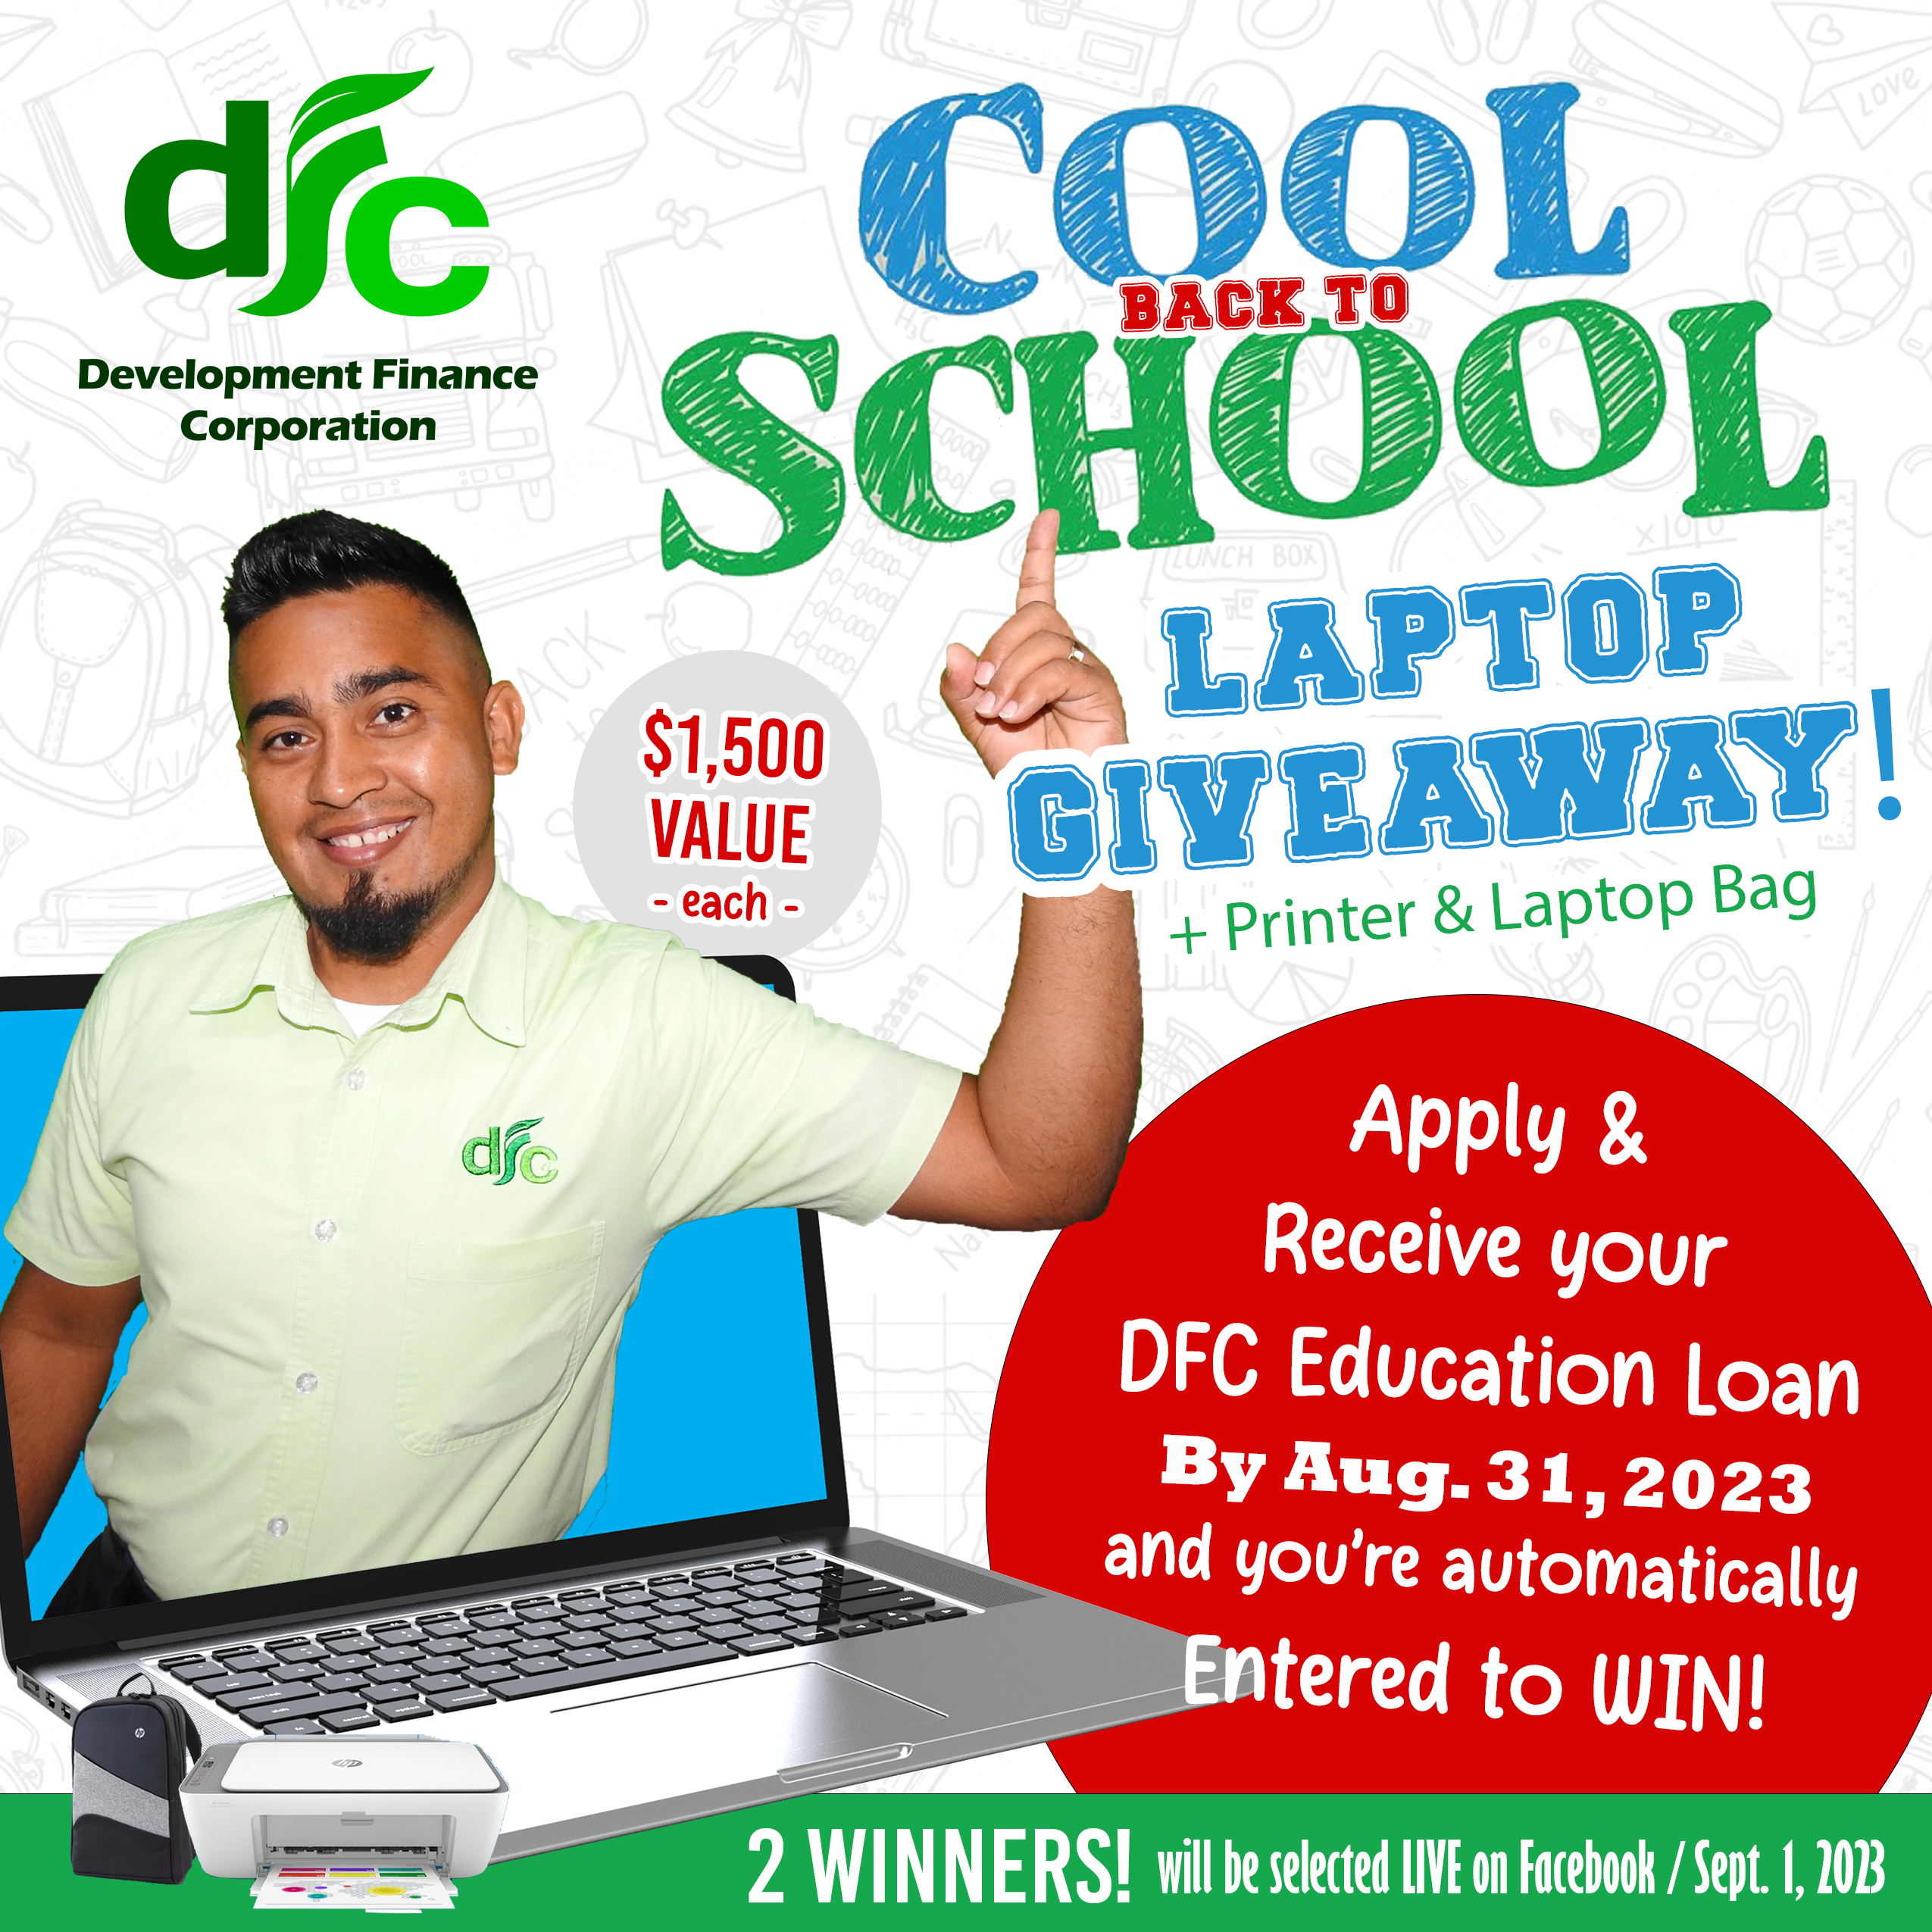 DFC Cool Back to School Laptop Package Giveaway